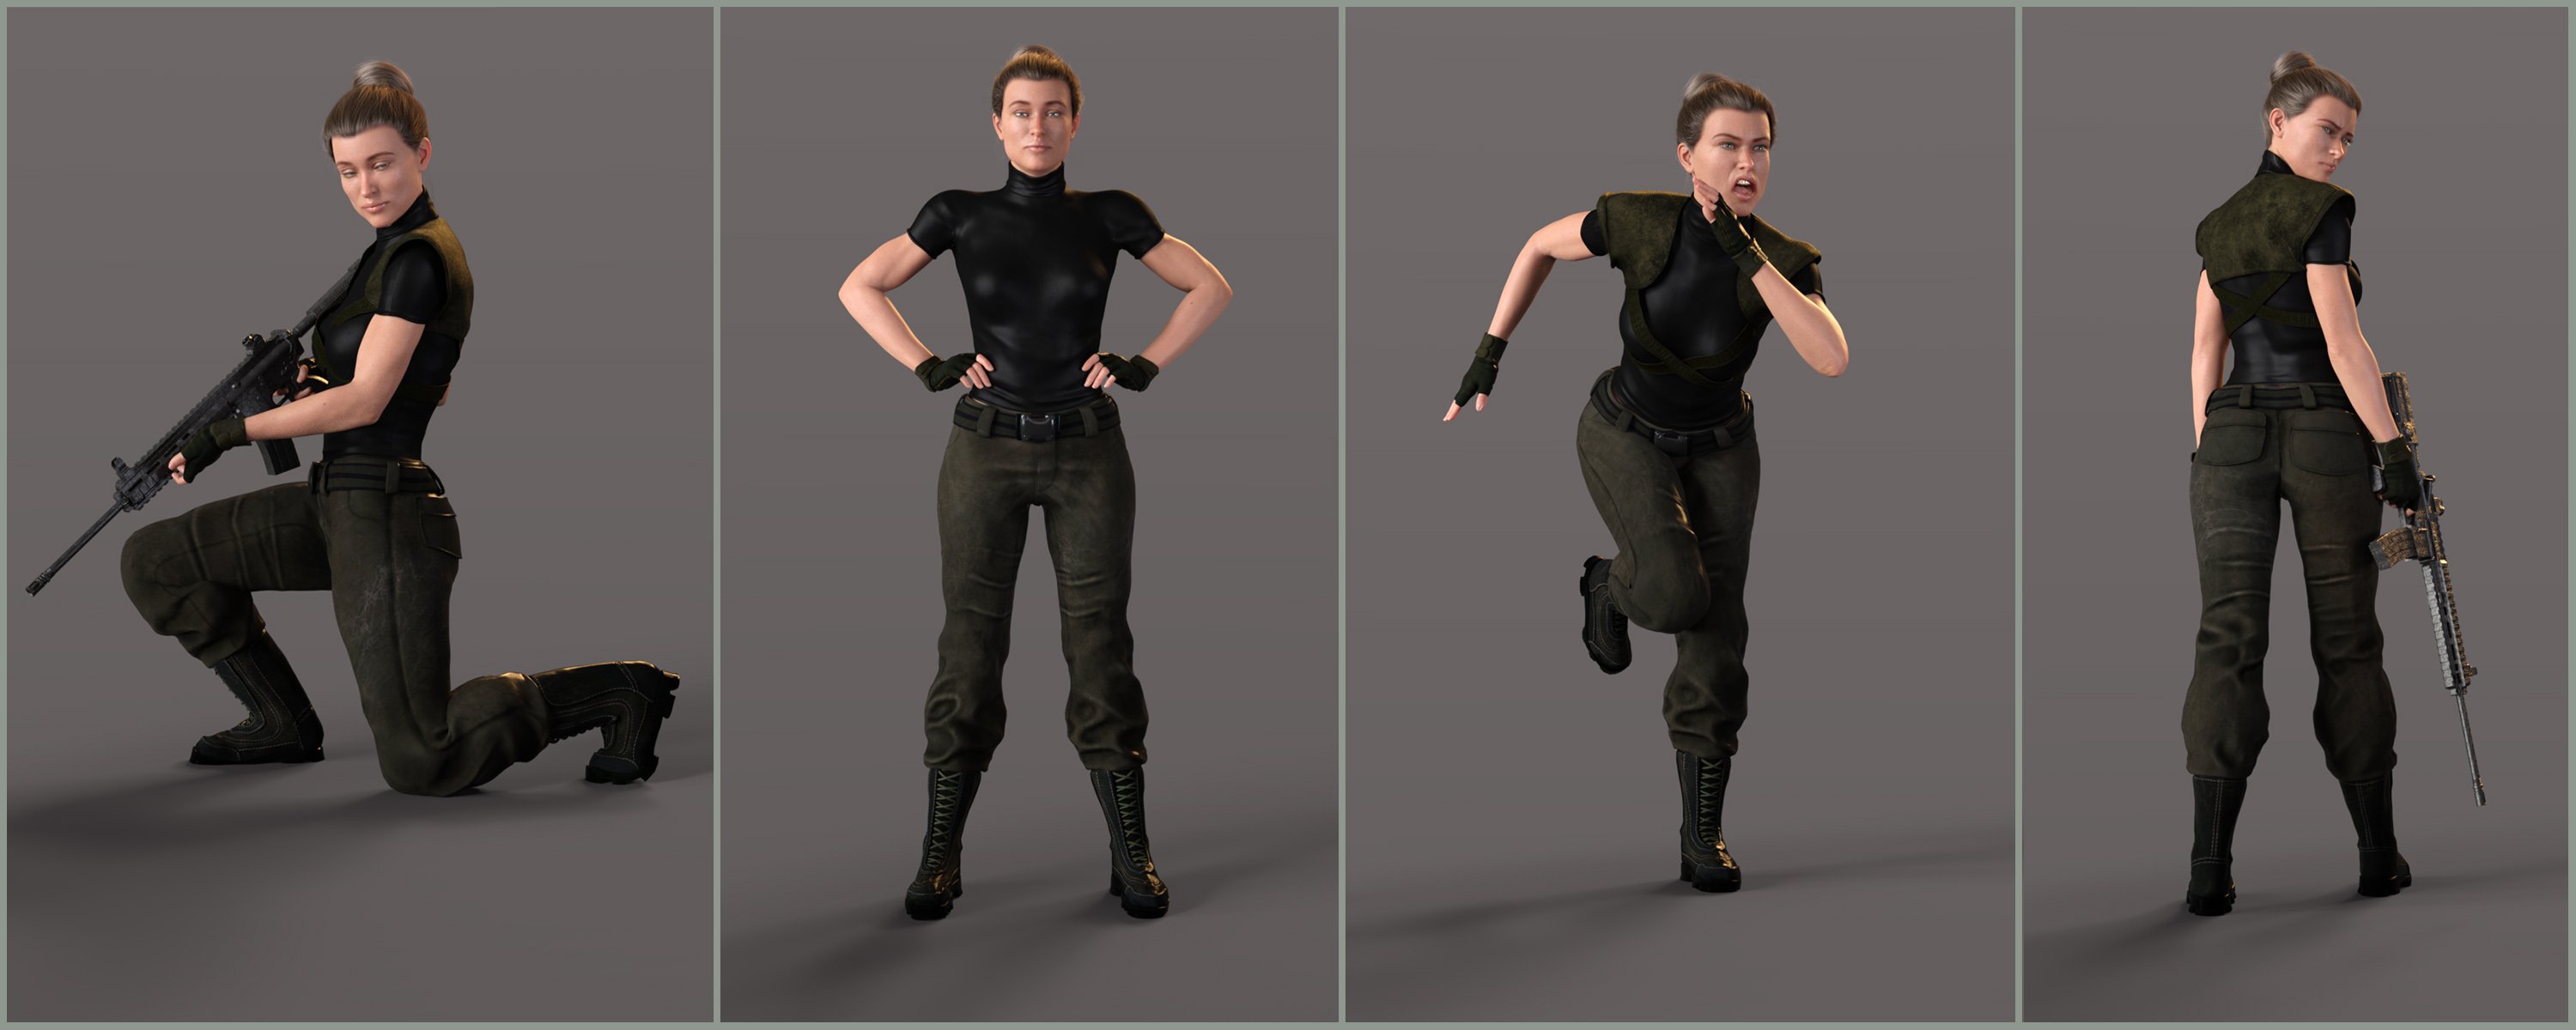 Z Empowered Poses and Expressions for CJ 8 by: Zeddicuss, 3D Models by Daz 3D